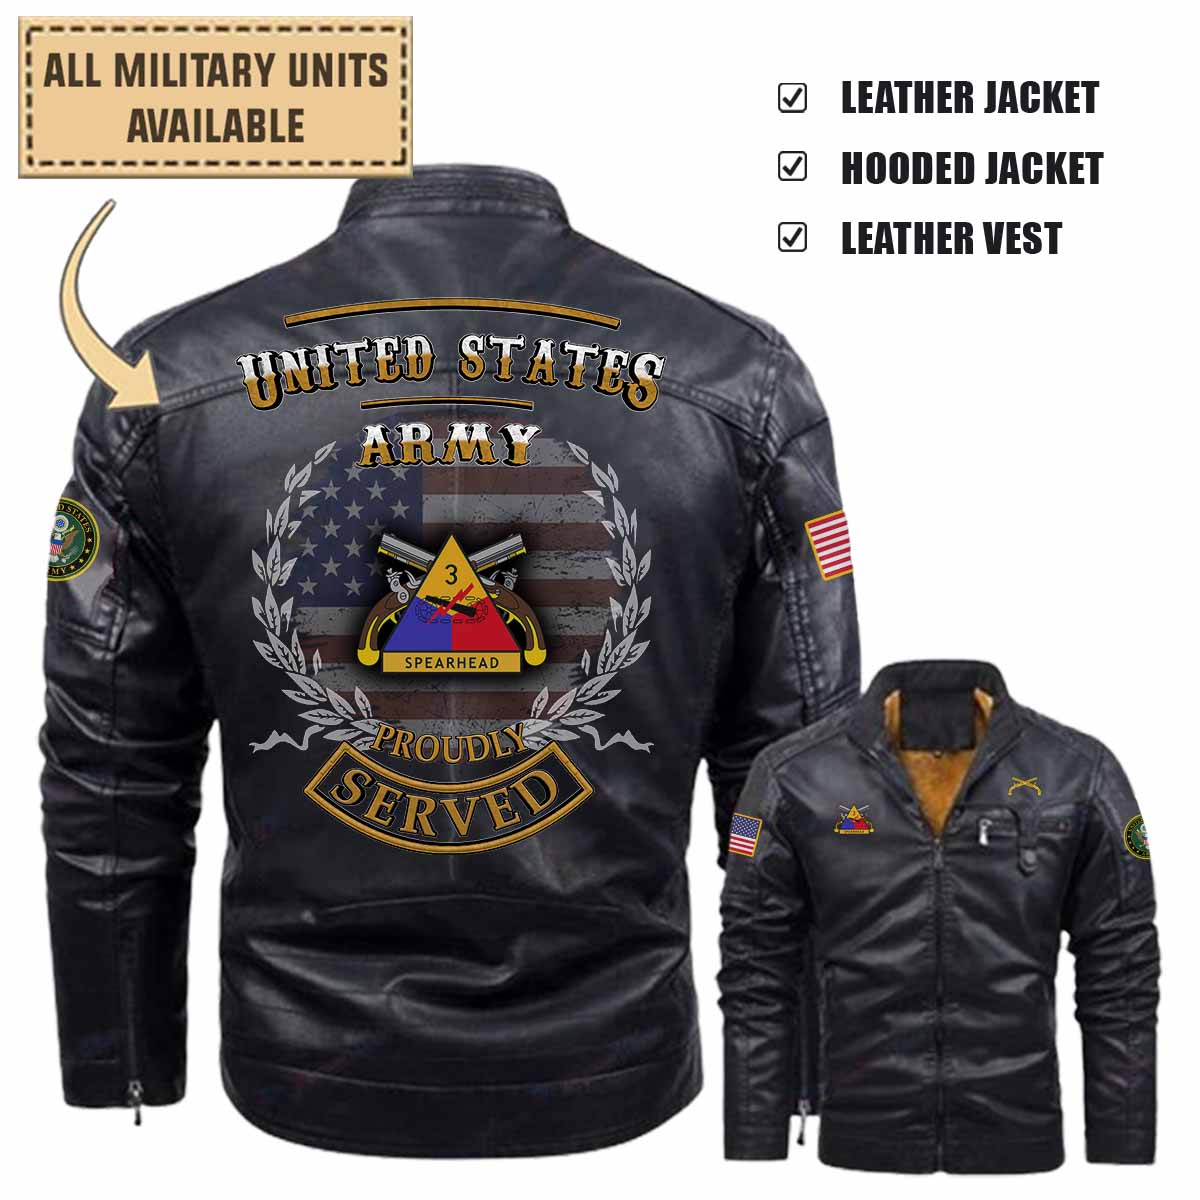 503rd MP CO 503rd Military Police Company_Military Leather Jacket and Vest